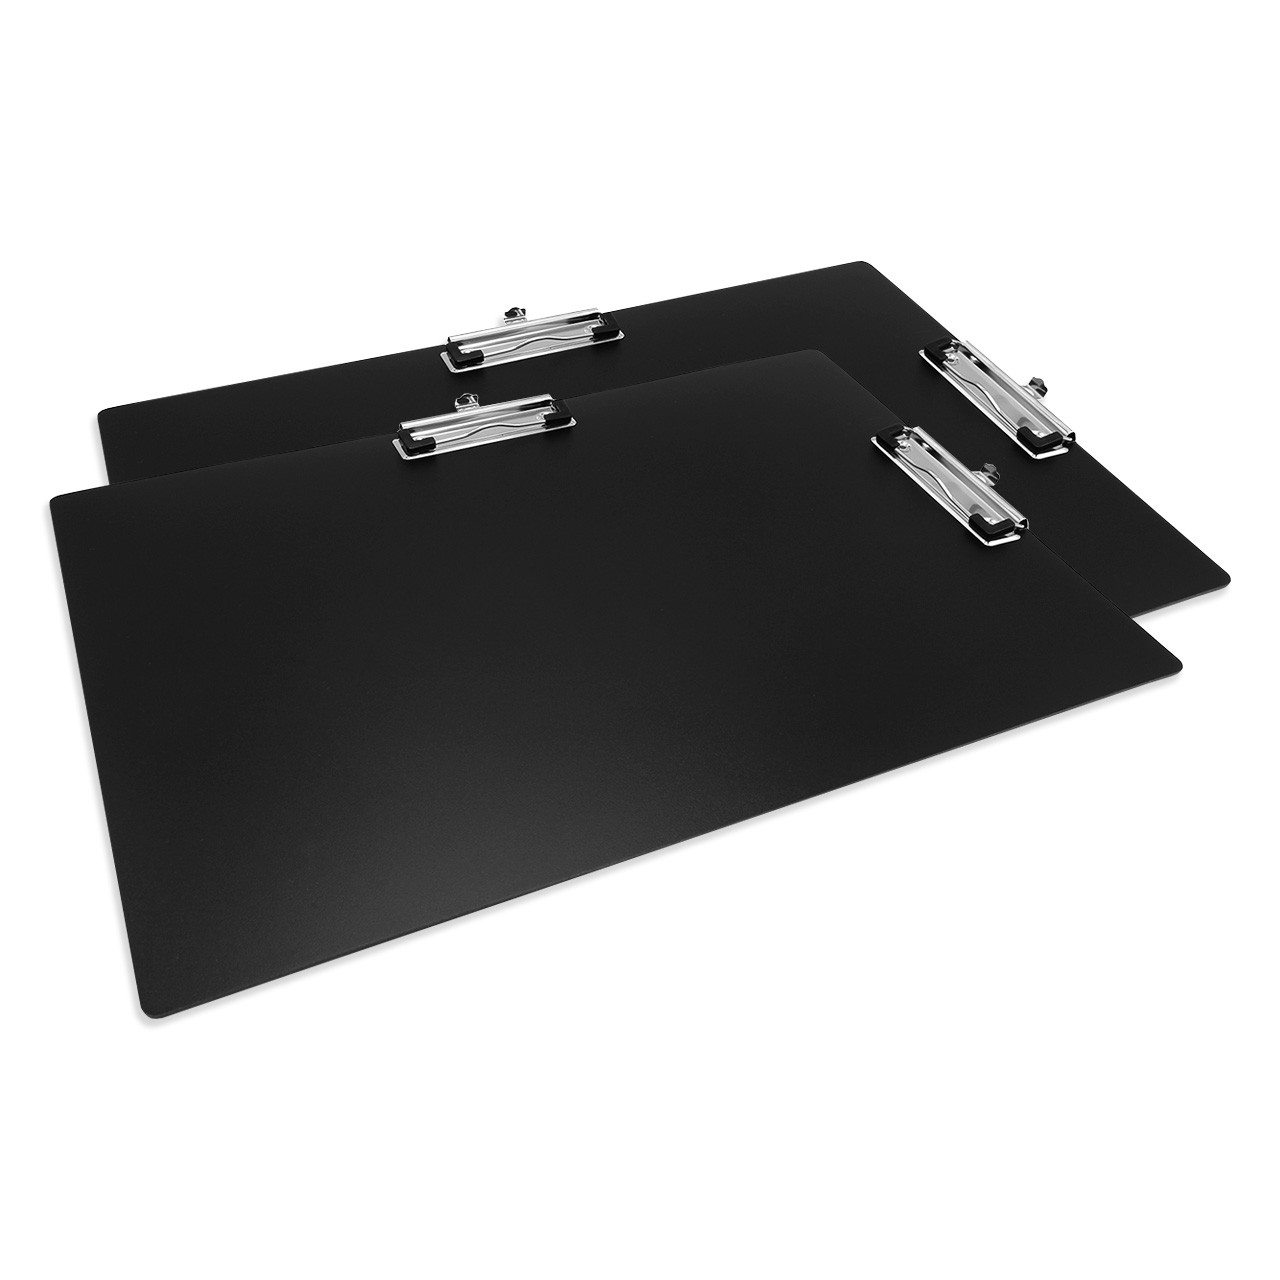  Double Clip 11x17 Clipboard Plastic Extra Large Clipboard  11x17 Black 2 Pack